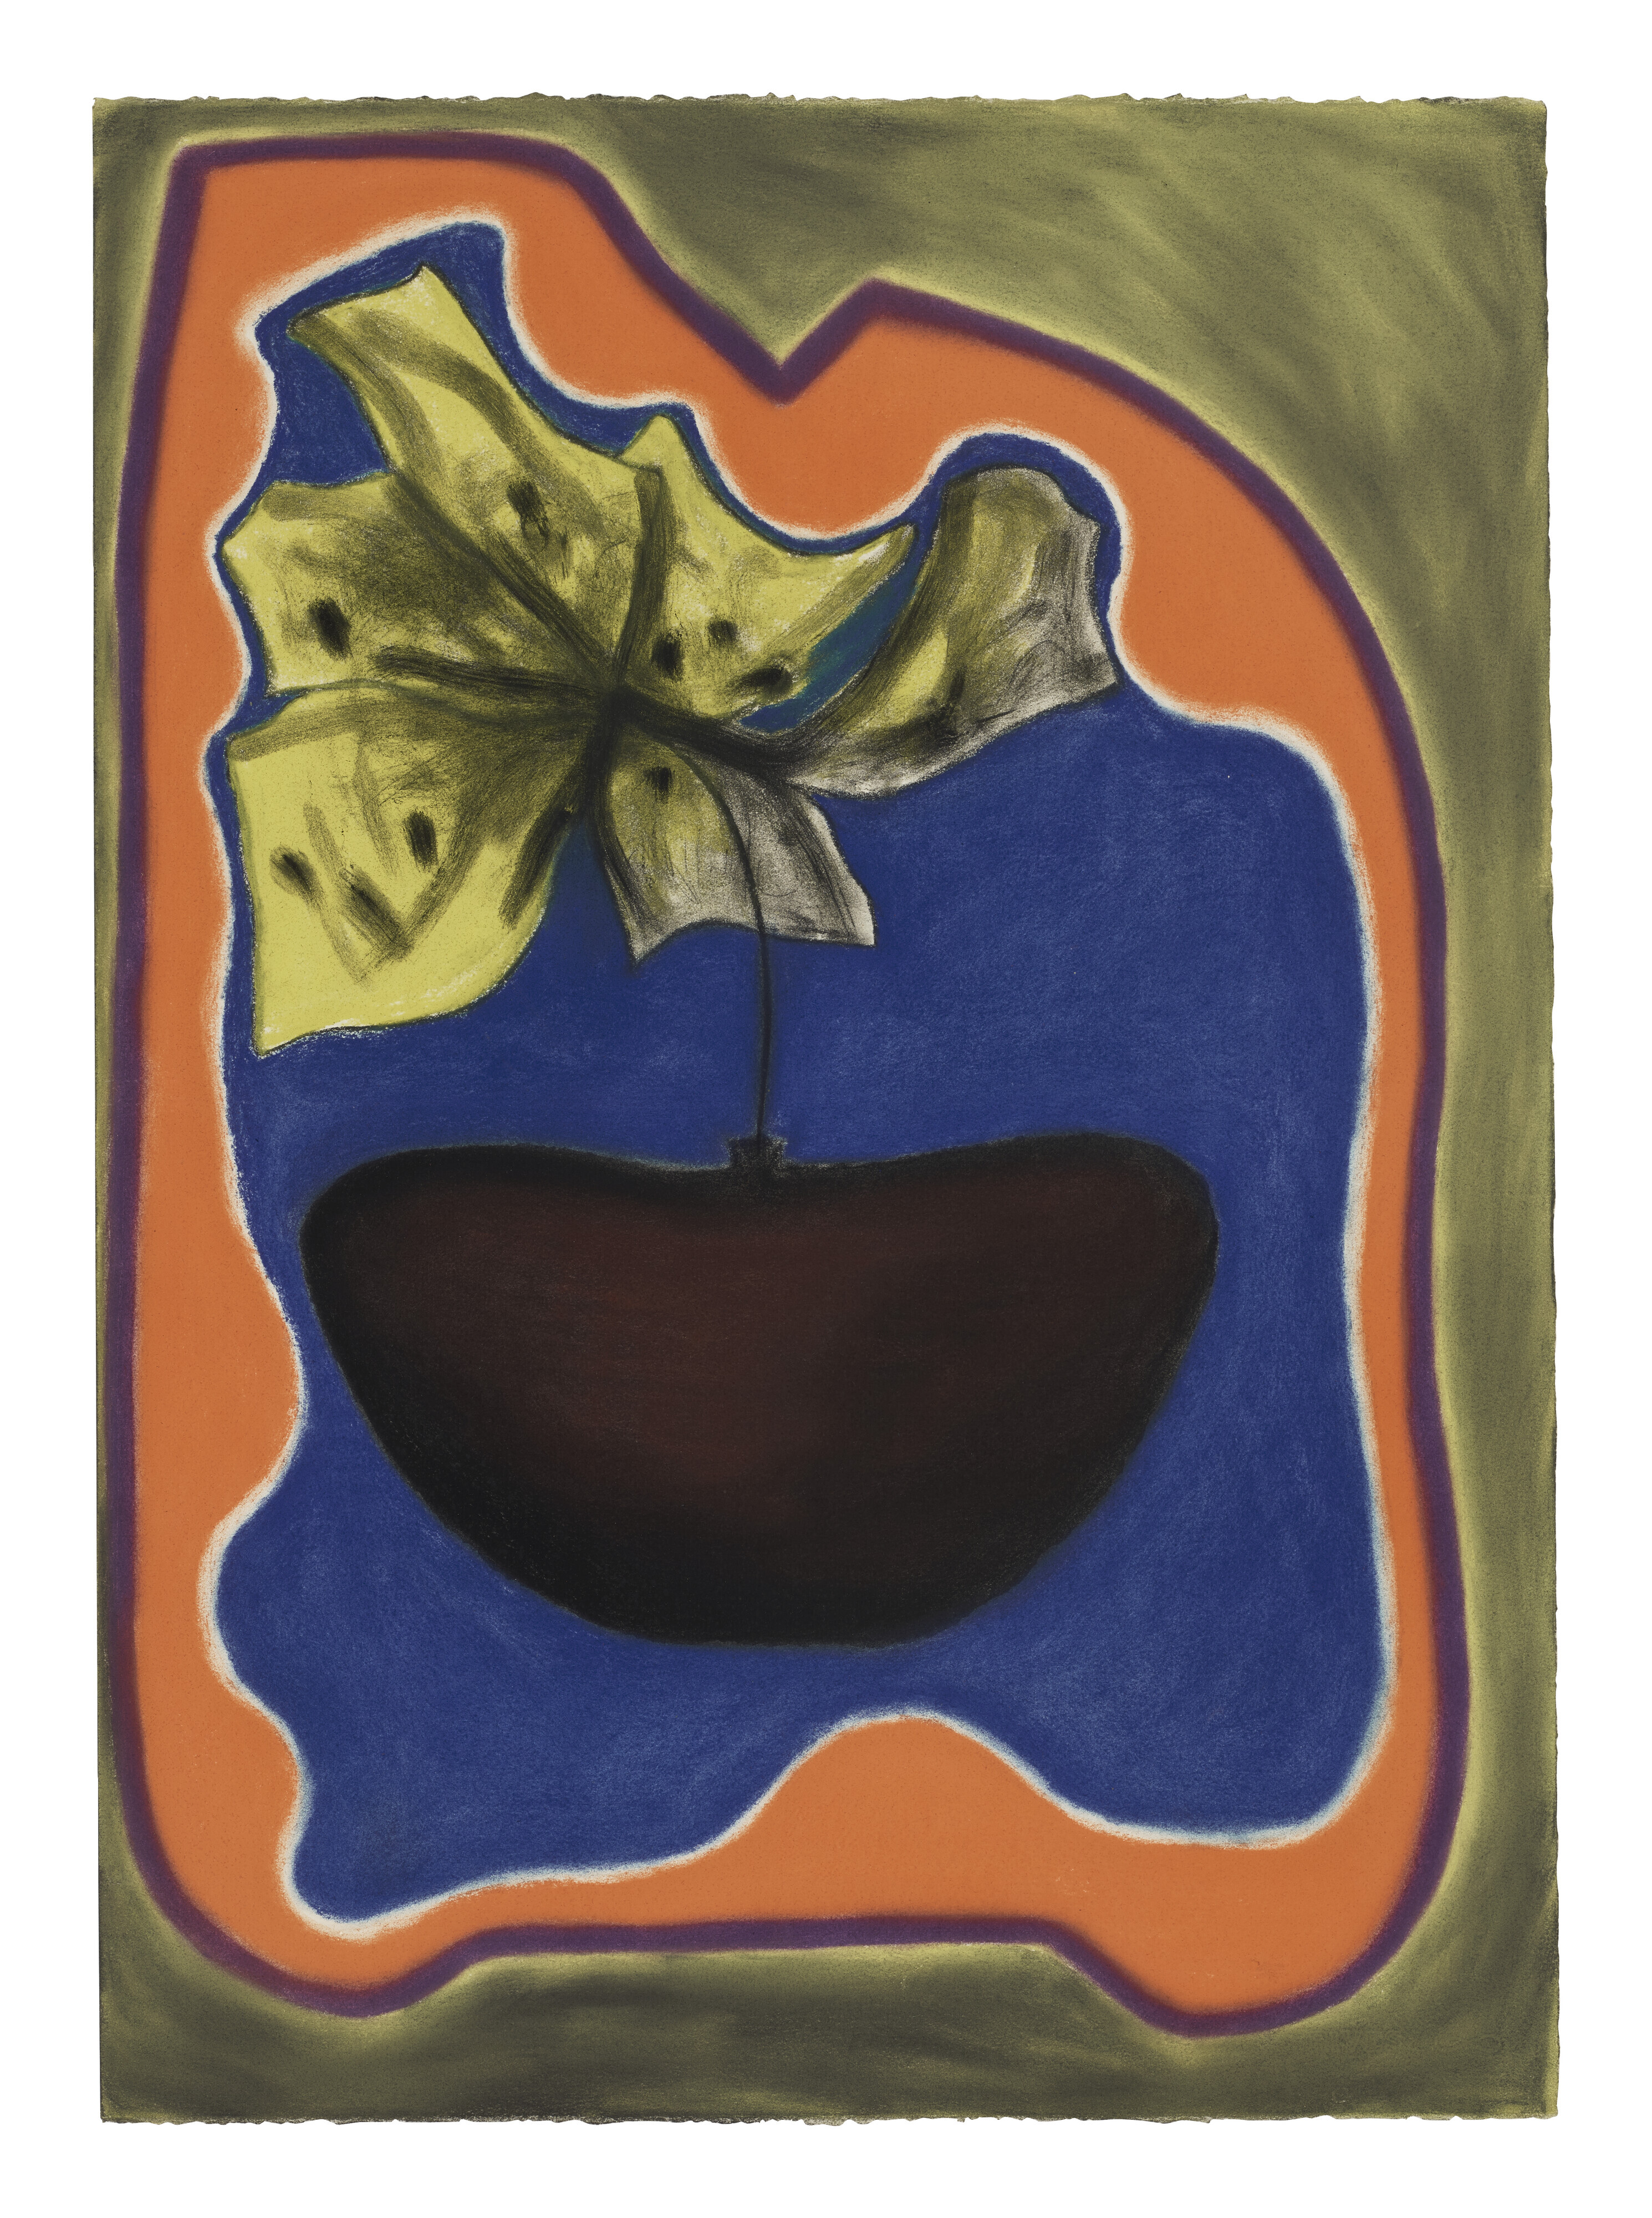 Francesco Clemente, ‘Rain,’ 1988 pastel on paper, 26 by 19in. (66 by 48.2cm), on view in Francesco Clemente: Works from the Collection of Thomas and Doris Ammann. Image courtesy of Christie’s Images Ltd. 2022